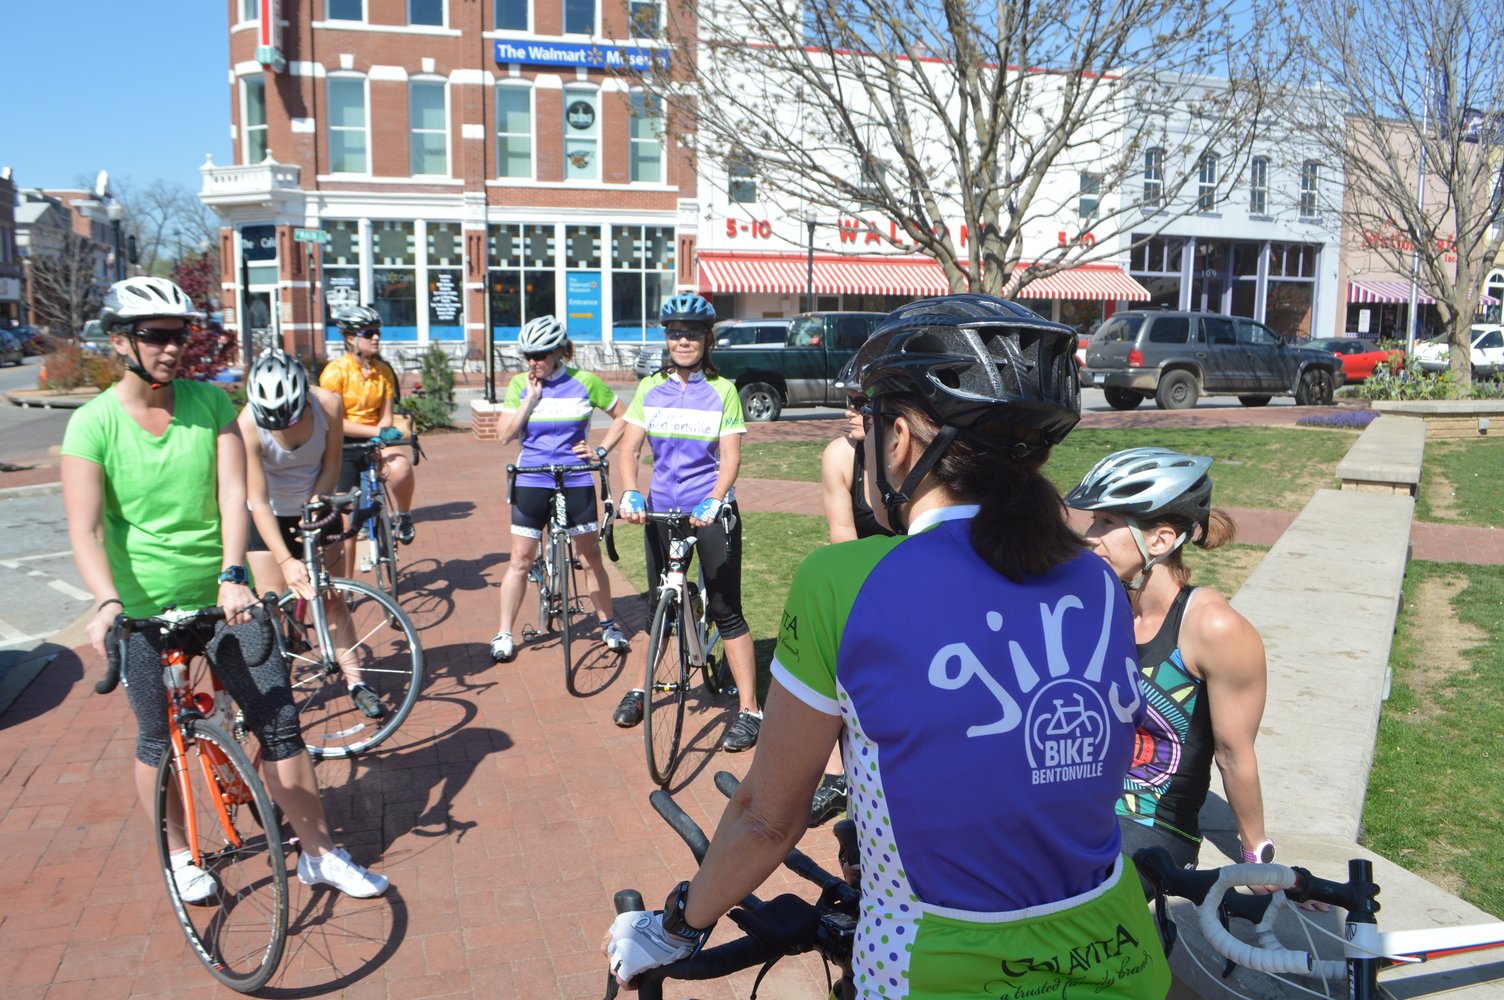 Cyclists prepare to take part in a  Girls Bike Bentonville  group ride. One of the group's weekly intermediate level rides starts on the Bentonville Square at 11:15 am on Tuesdays. The group hosts regular weekly rides on Tuesdays, Thursdays and Saturdays.